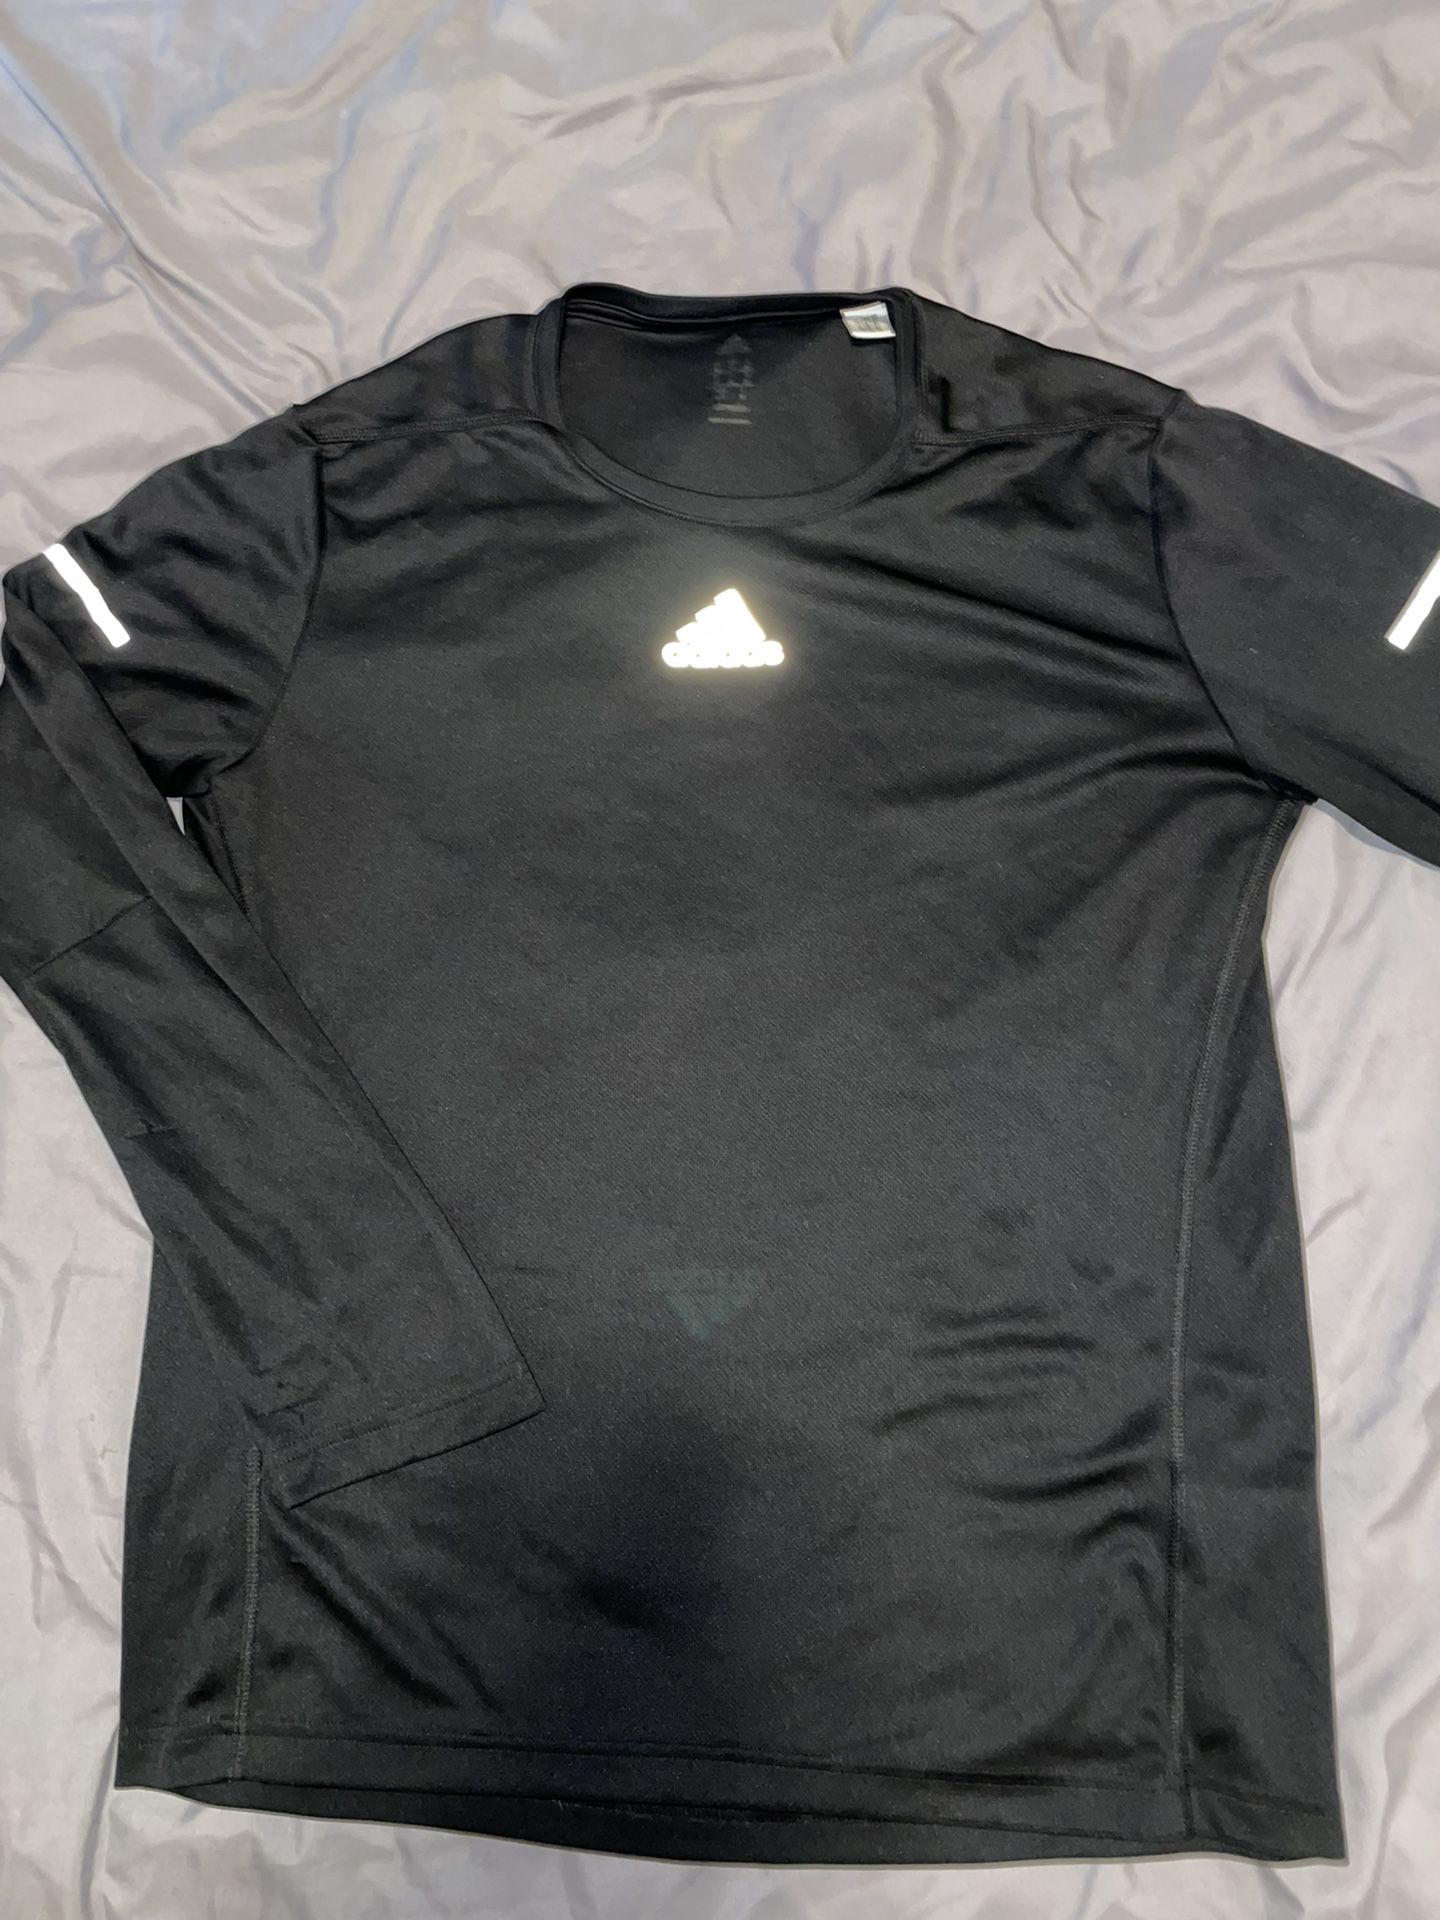 elleve mus Siesta adidas running shirt CLIMALITE CLIMACOOL for Sale in Brooklyn, NY - OfferUp